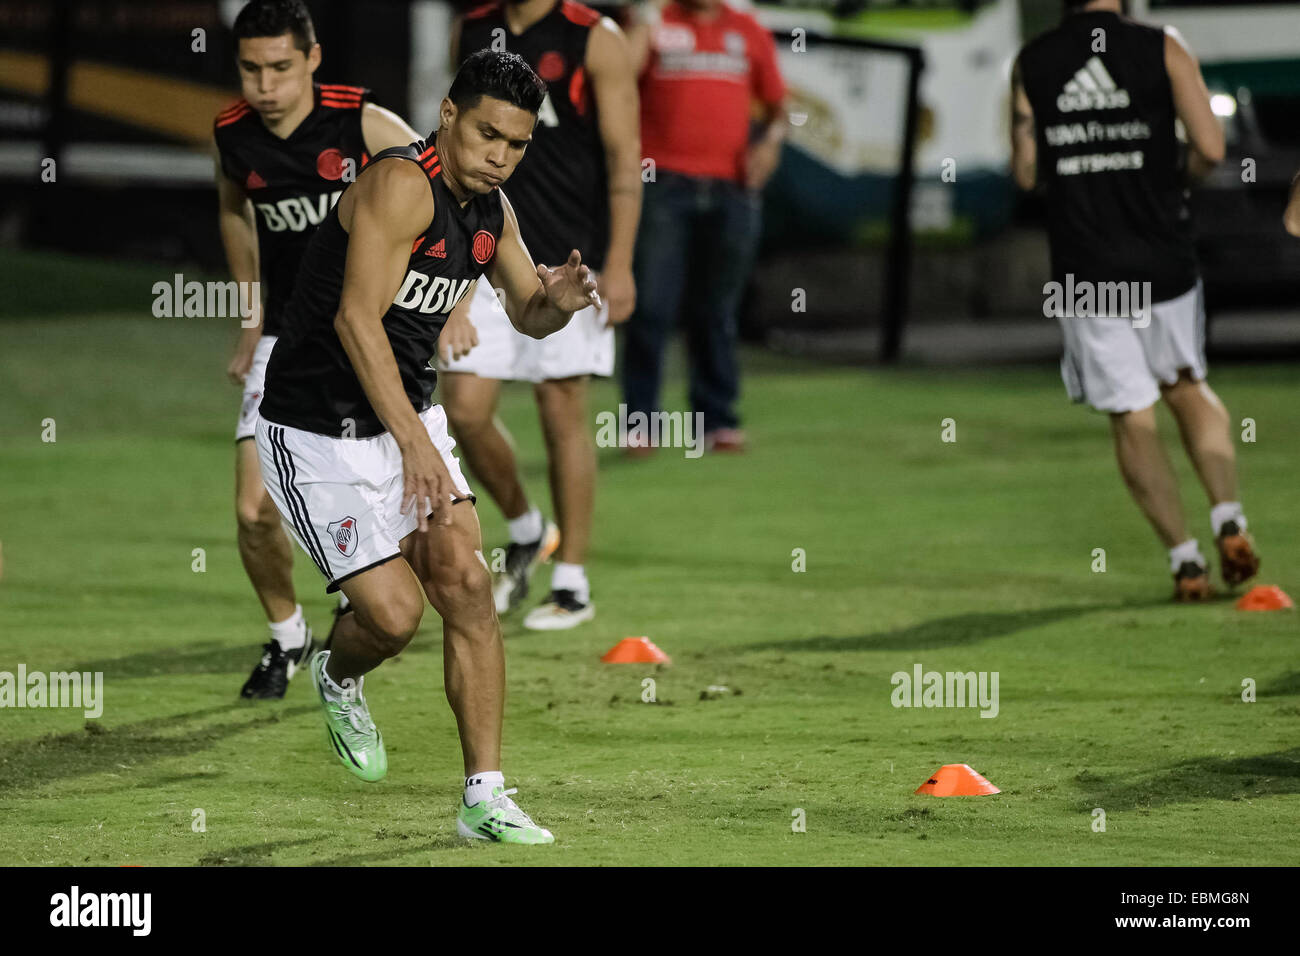 Medellin, Colombia. 2nd Dec, 2014. Teofilo Gutierrez (Front) of River Plate takes part in a training session prior to the first match of the South American Cup final against Atletico Nacional in the Atanasio Girardot Stadium, in the city of Medellin, Colombia, on Dec. 2, 2014. © Jhon Paz/Xinhua/Alamy Live News Stock Photo